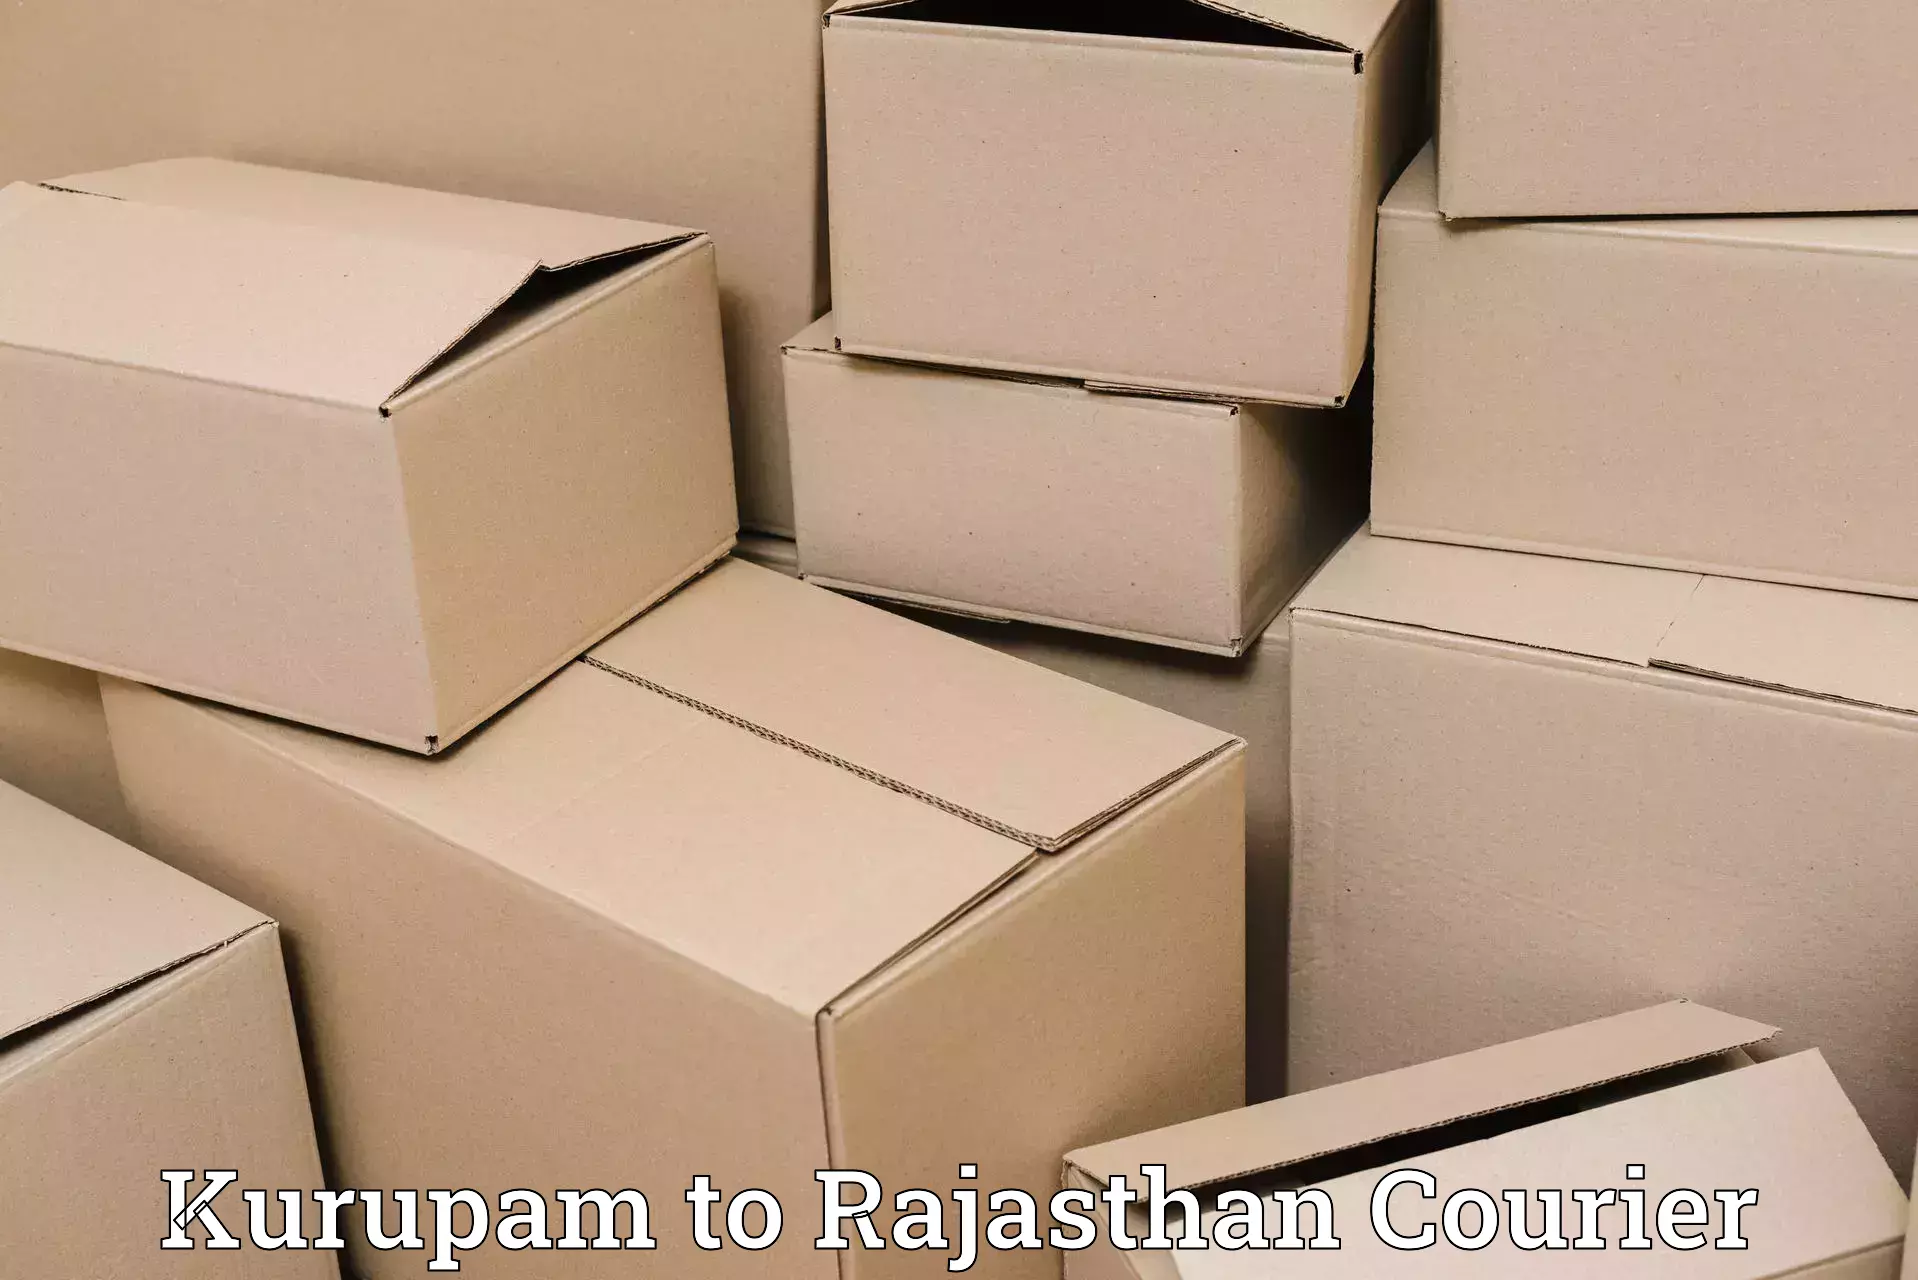 Same-day delivery options Kurupam to Rajasthan